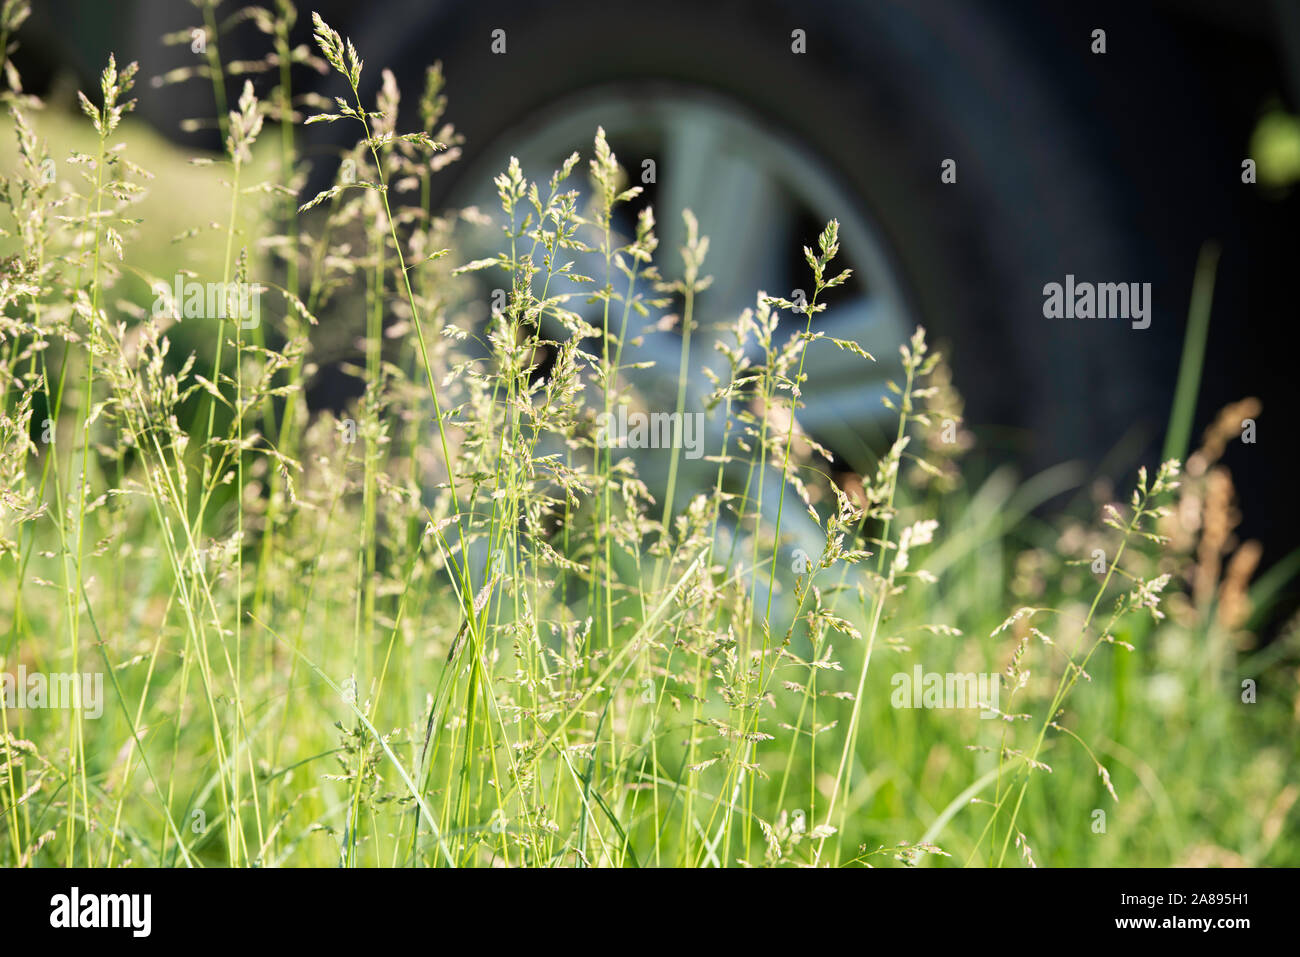 travelling by car, green grass in a field early summer Stock Photo